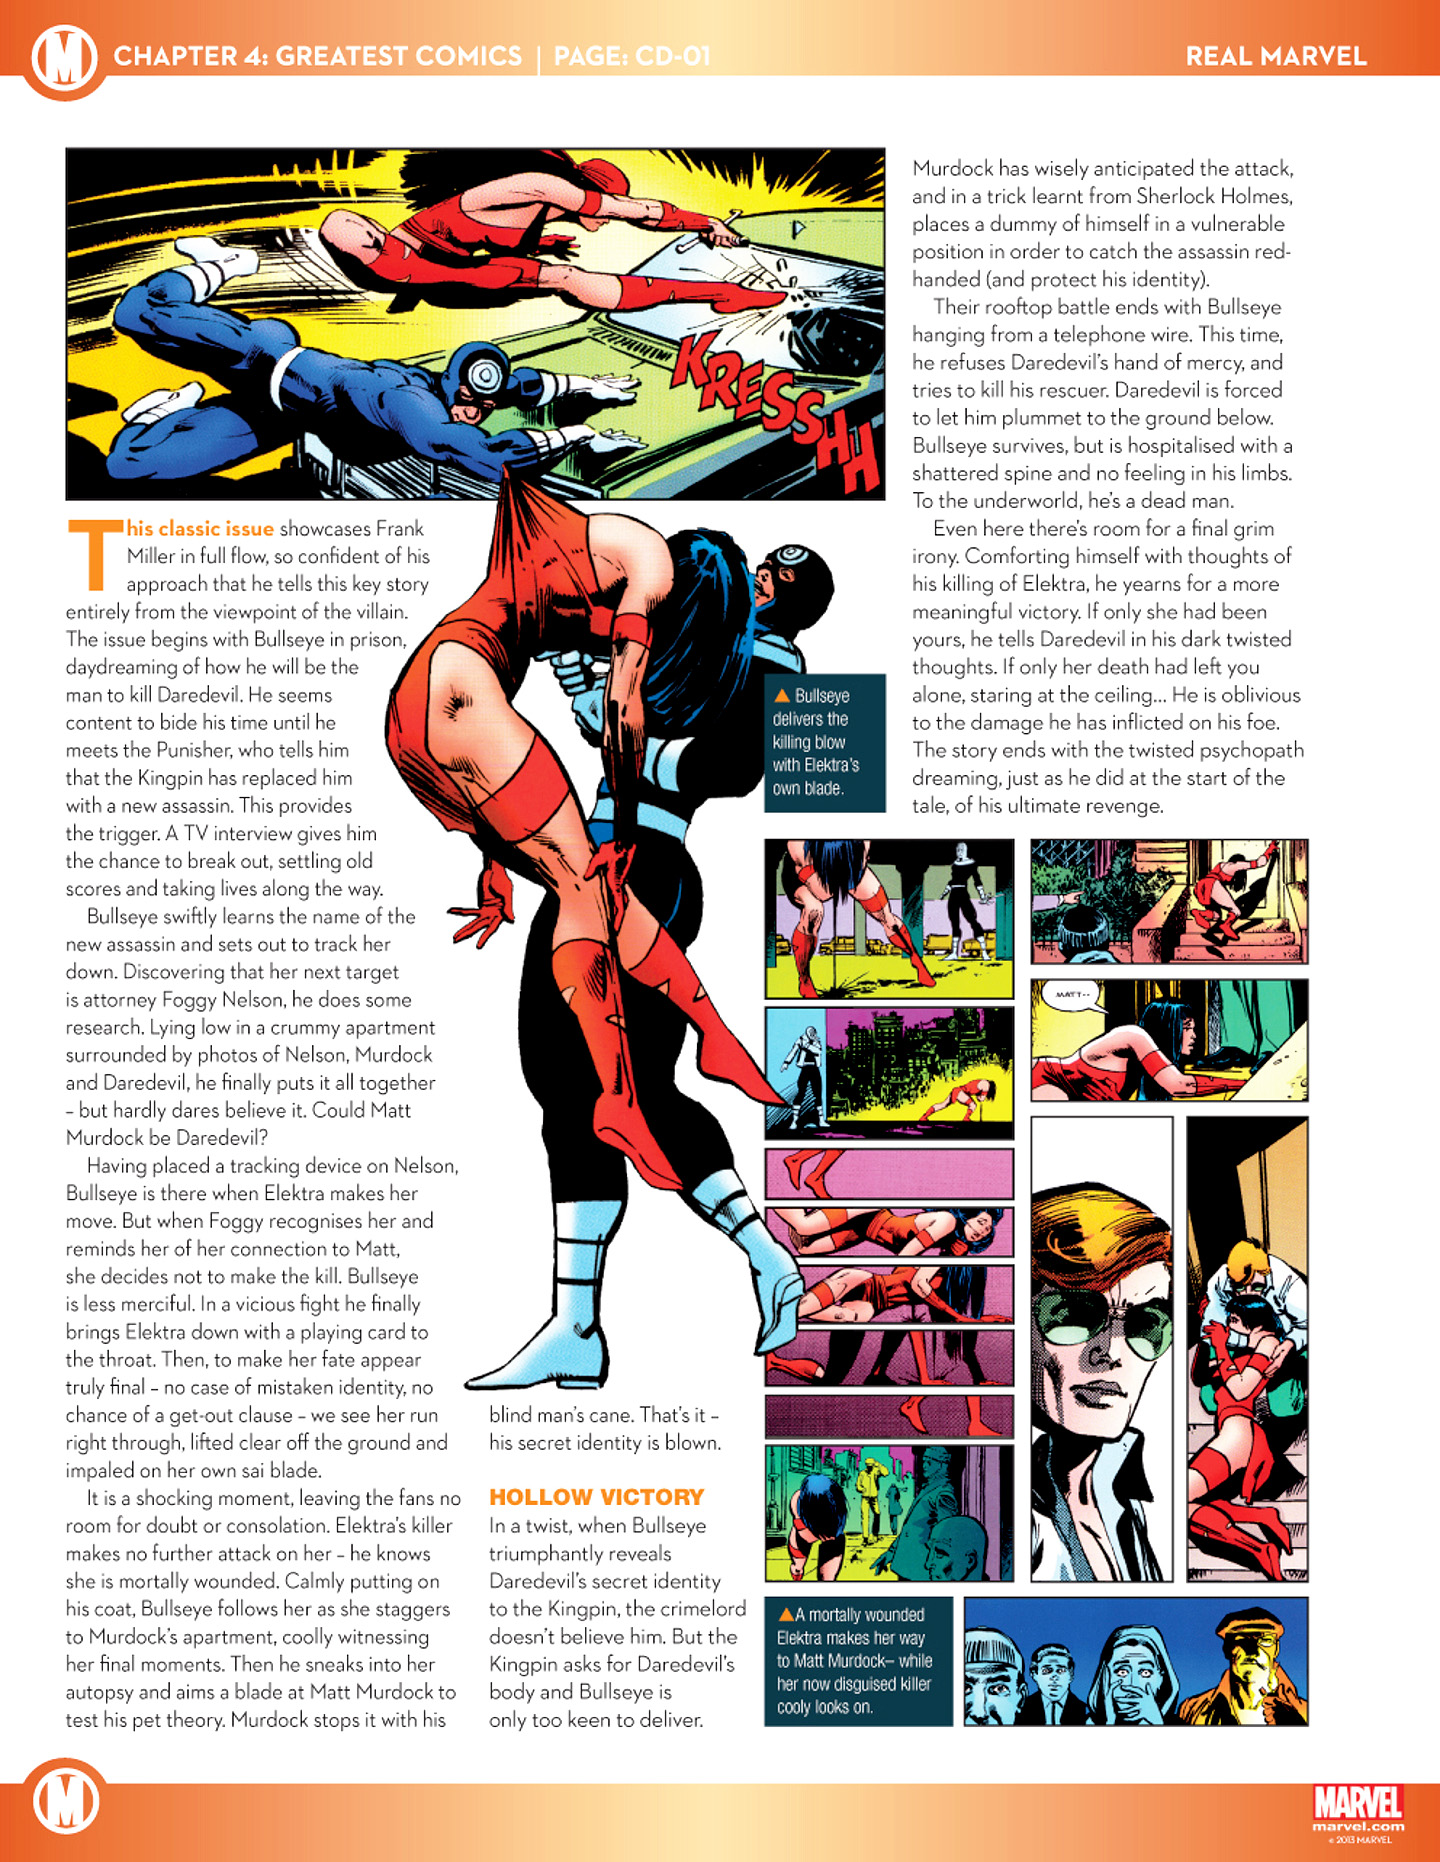 Read online Marvel Fact Files comic -  Issue #30 - 25